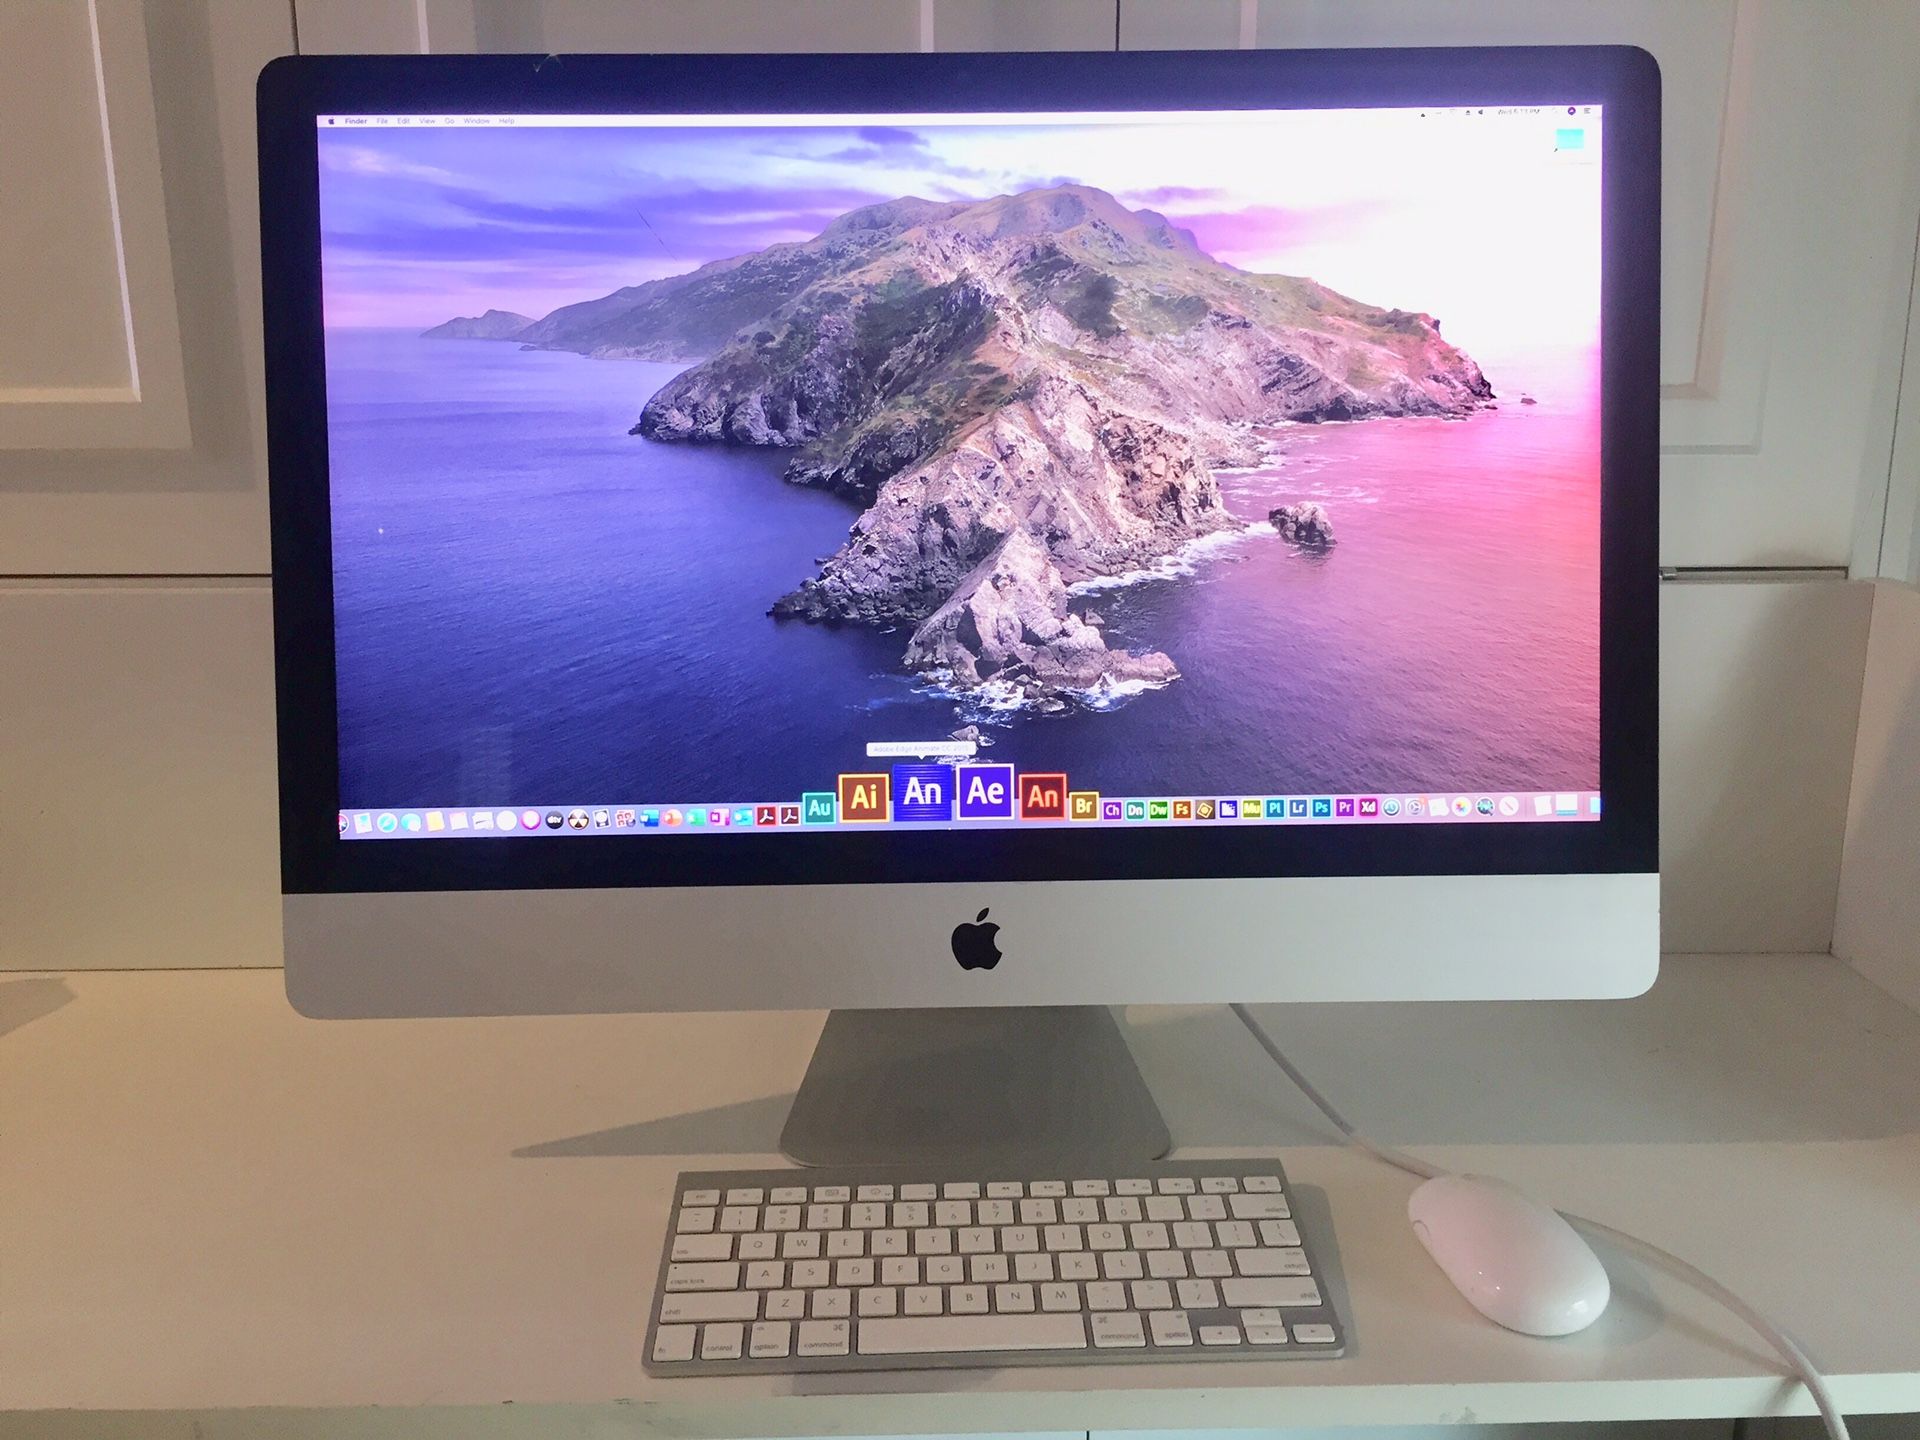 iMac 27” Loaded with Audio, Photo and Video Editing Software 2017 “READ FULL DESCRIPTION”